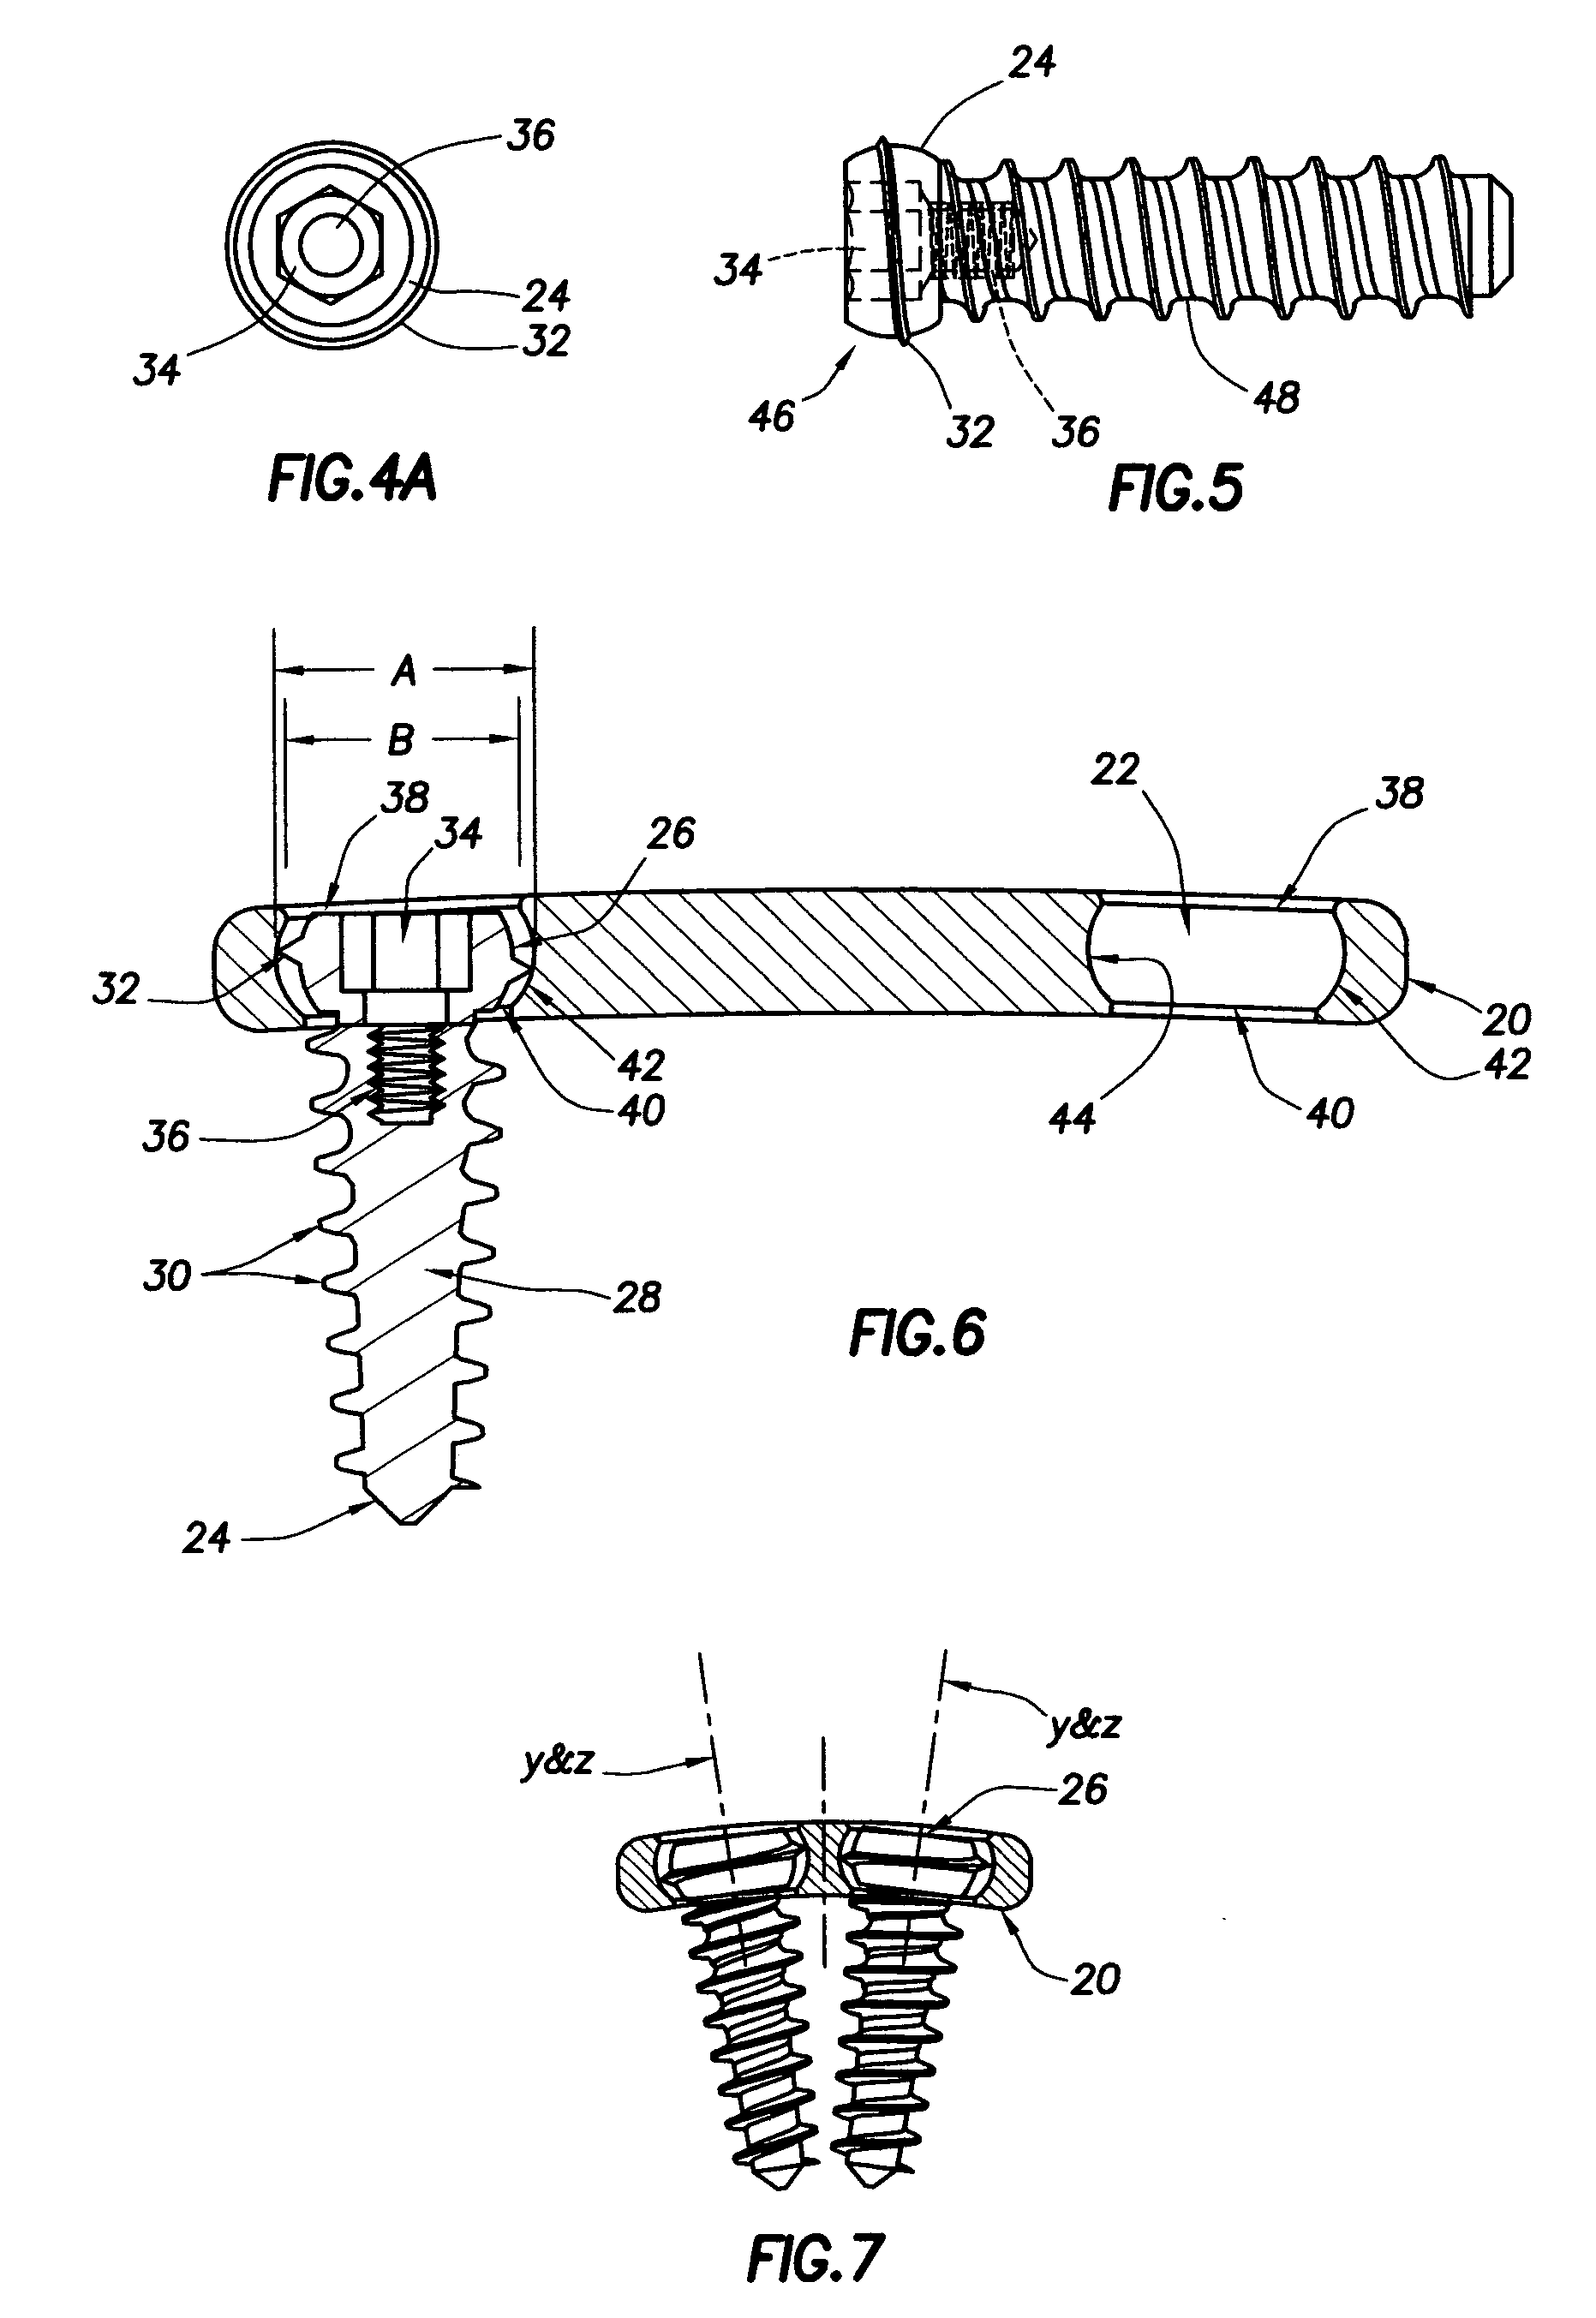 Multi-axis connection and methods for internal spinal stabilizers